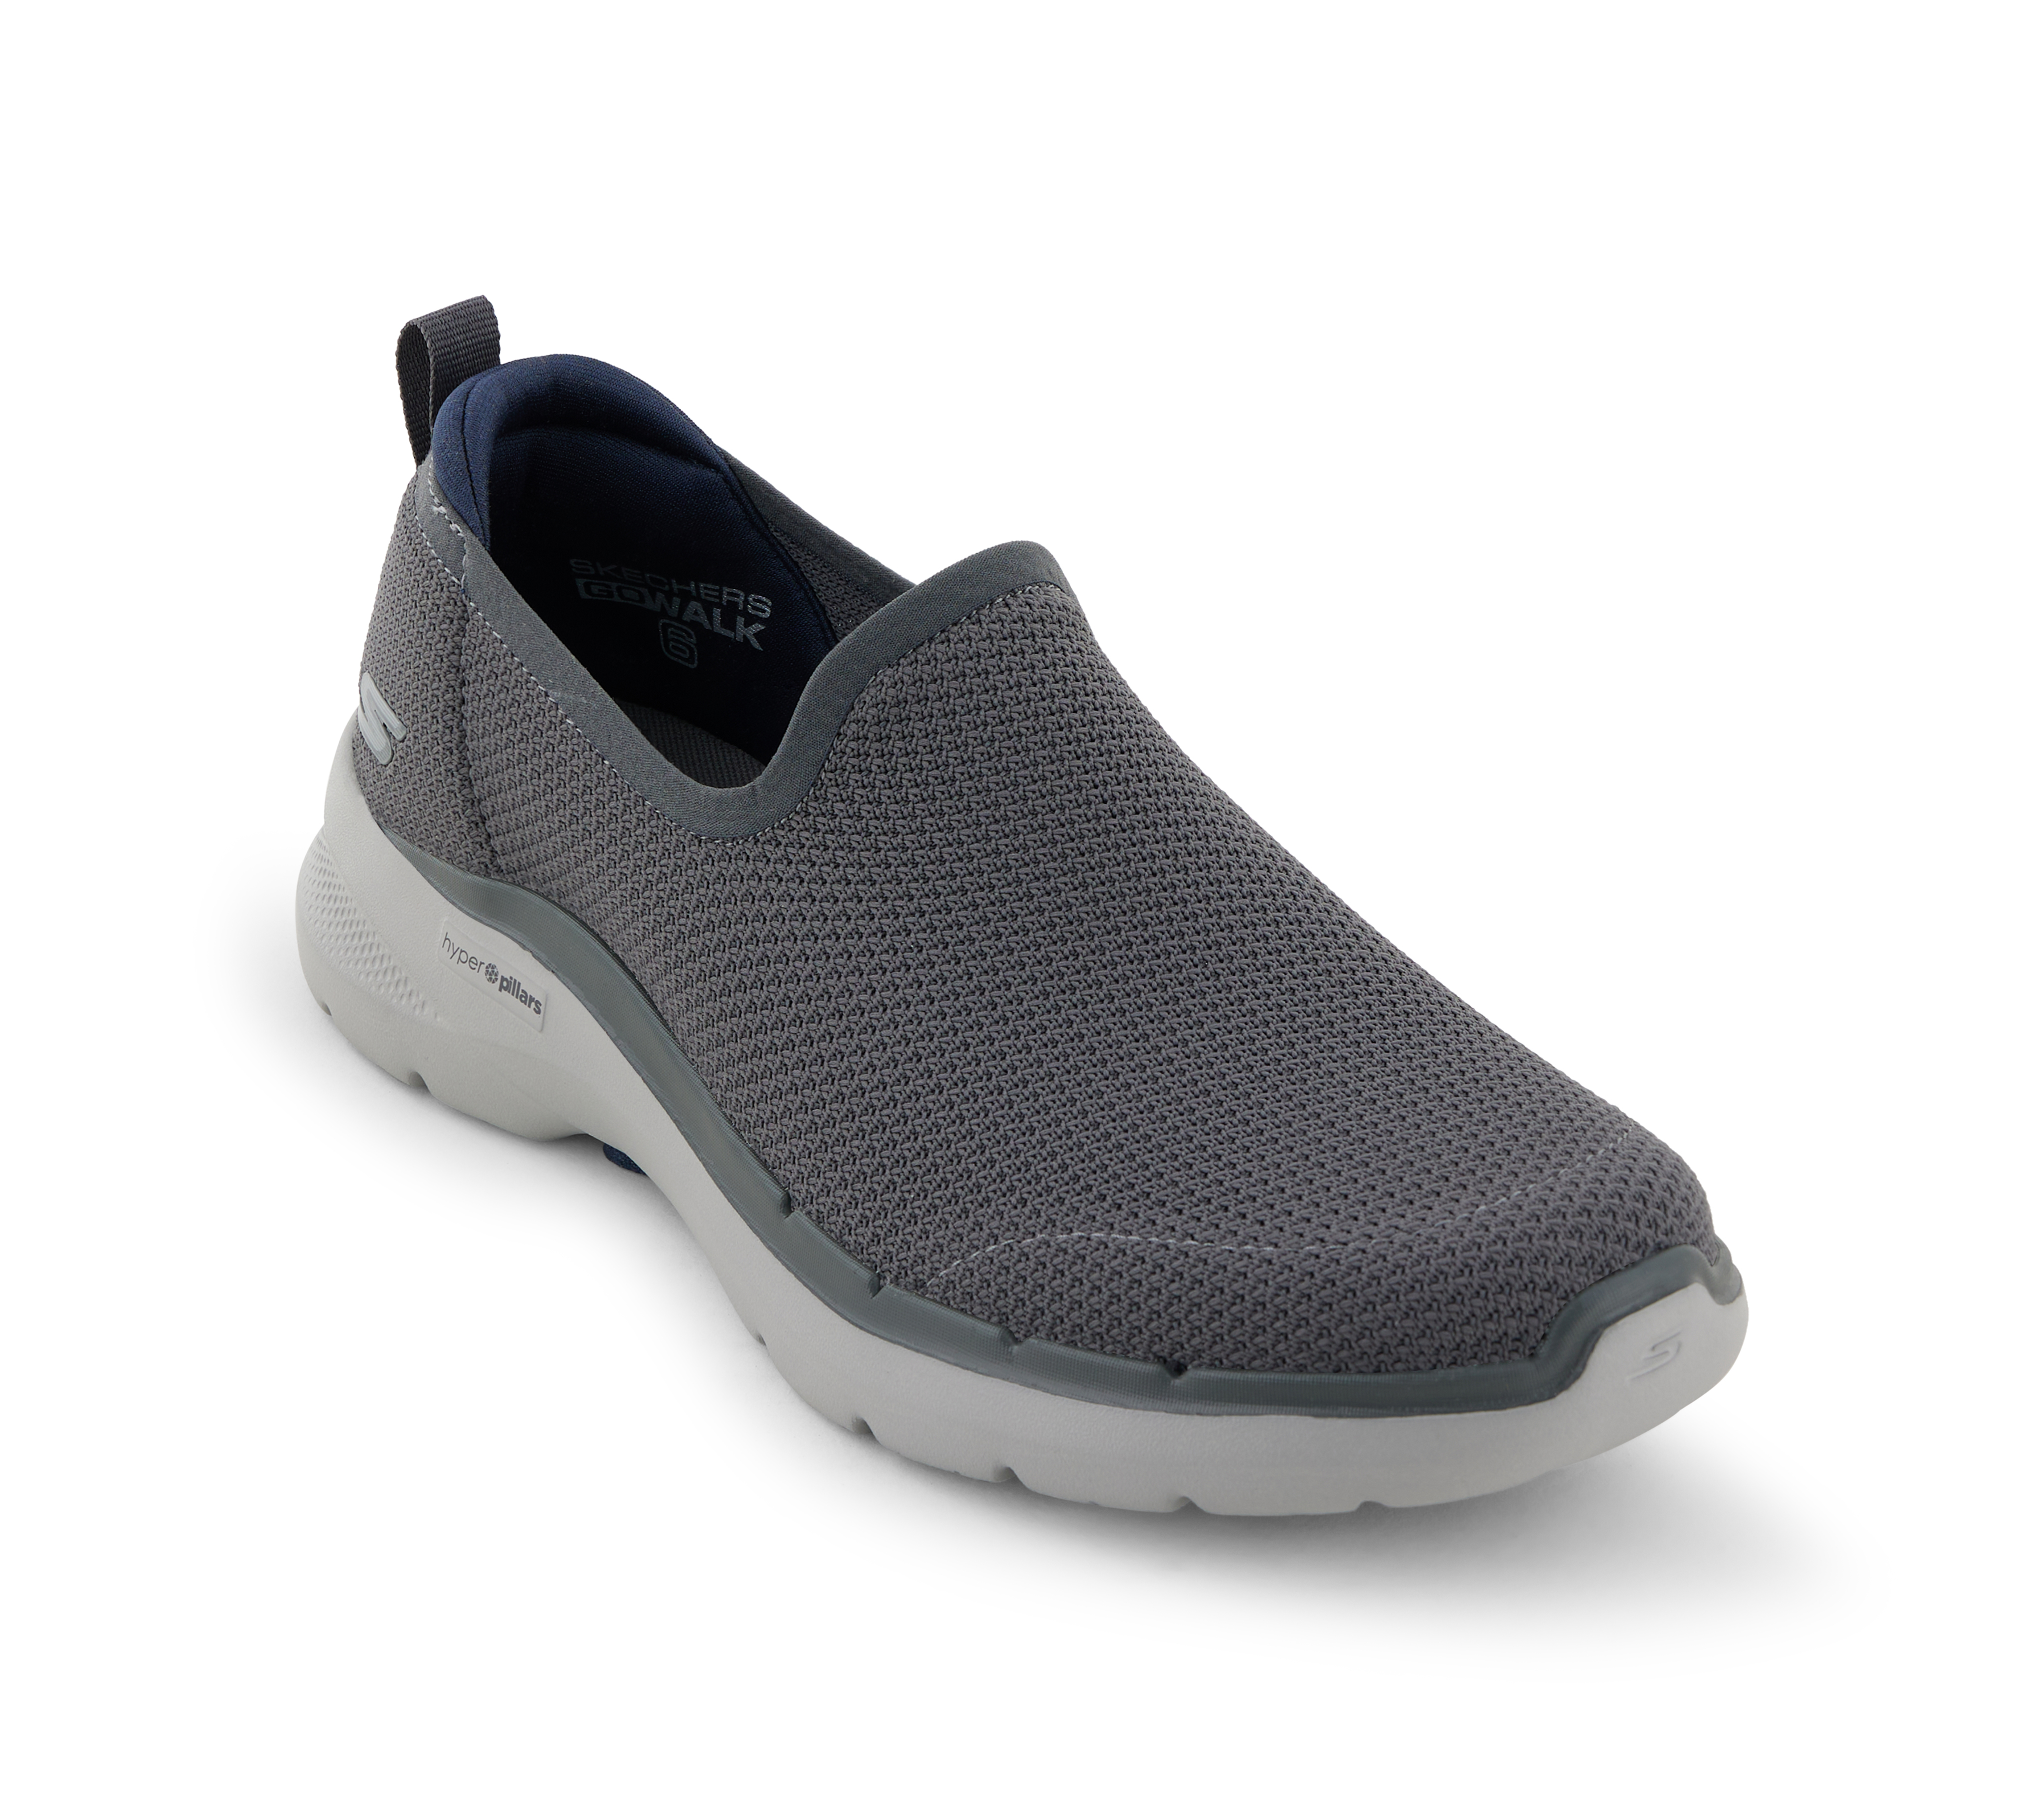 GO WALK 6 - FIRST CLASS, CCHARCOAL Footwear Lateral View